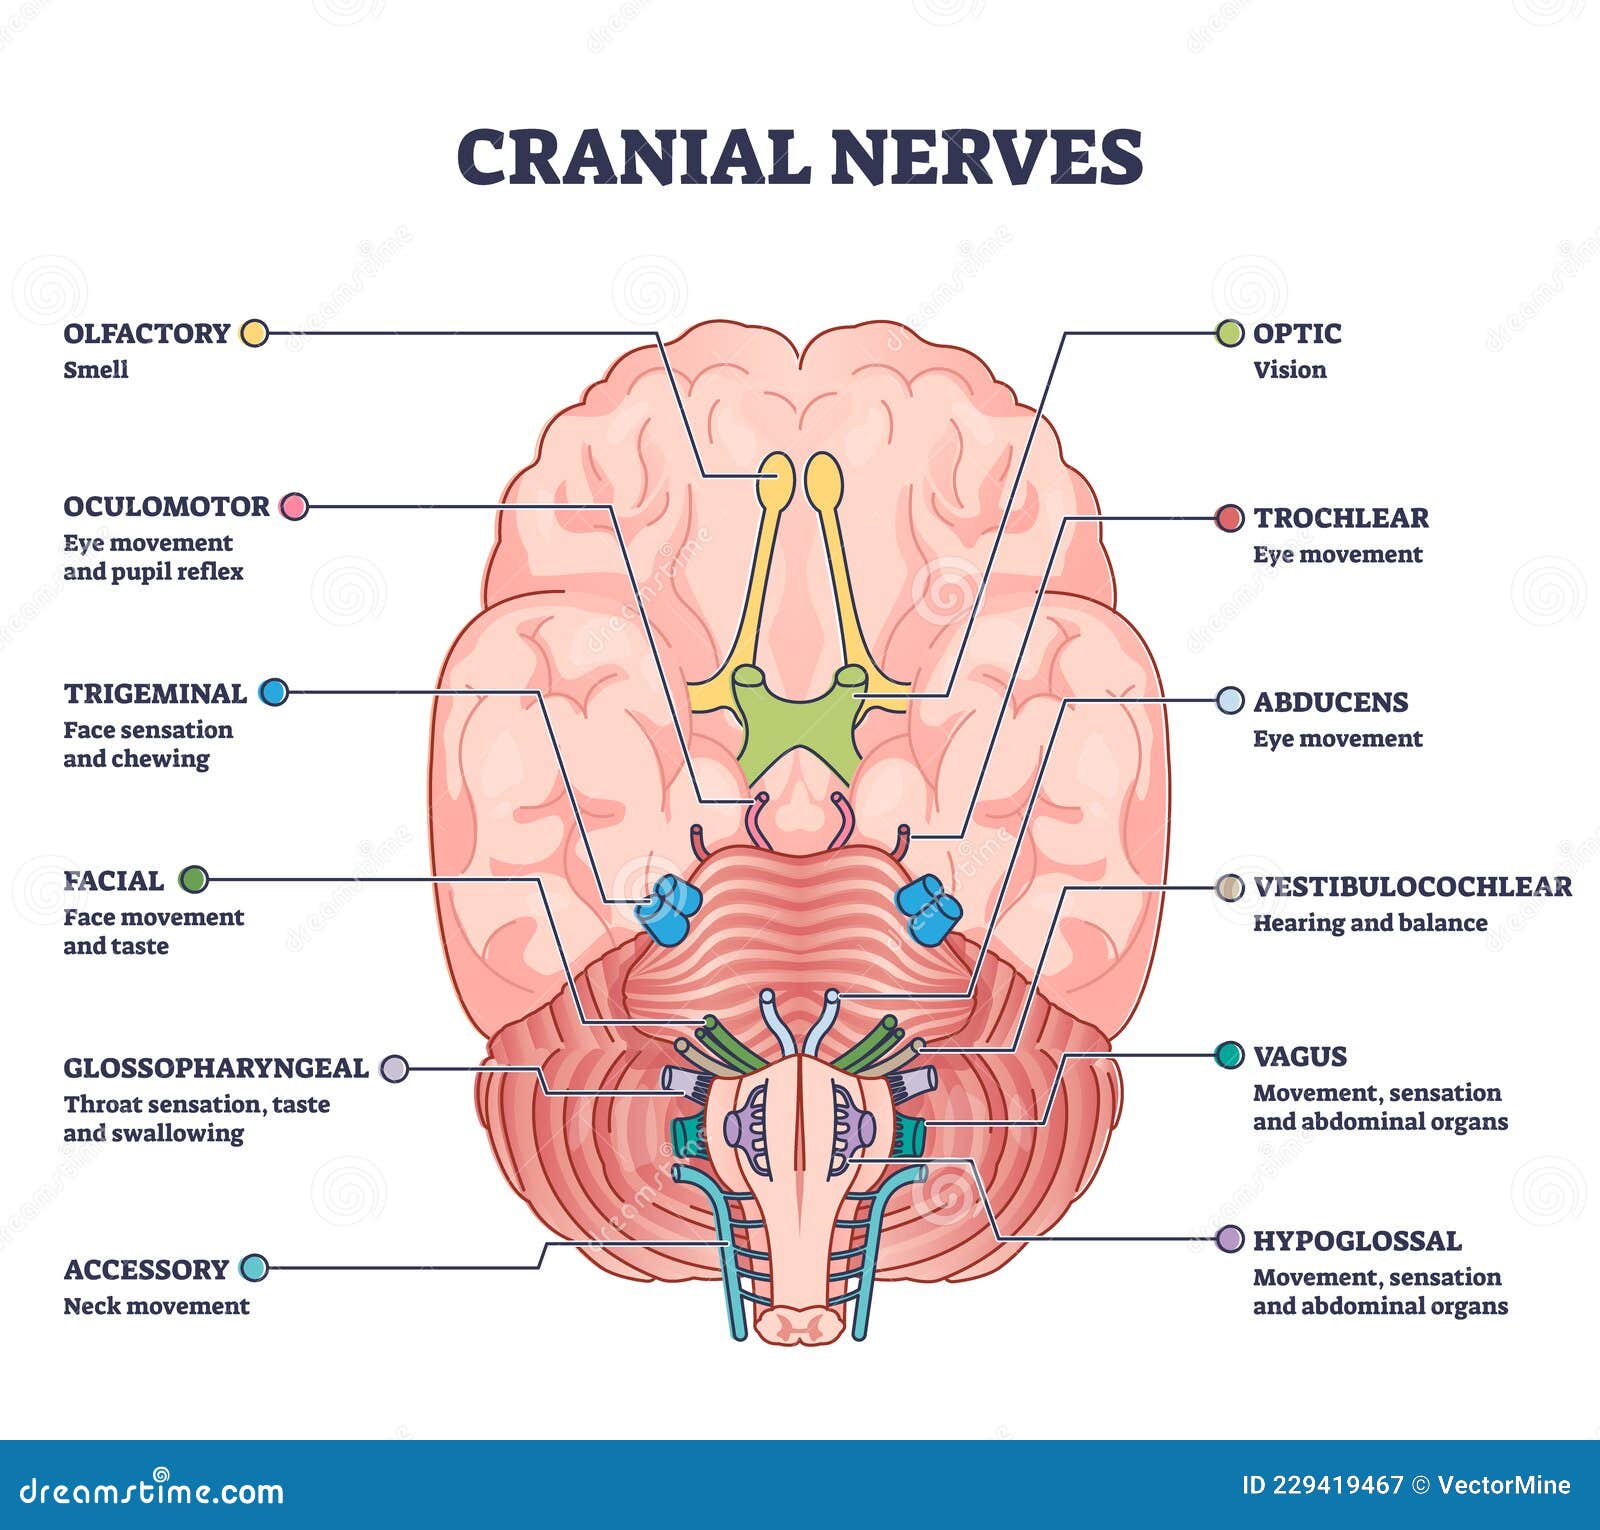 cranial nerves pairs with anatomical sensory functions in outline diagram